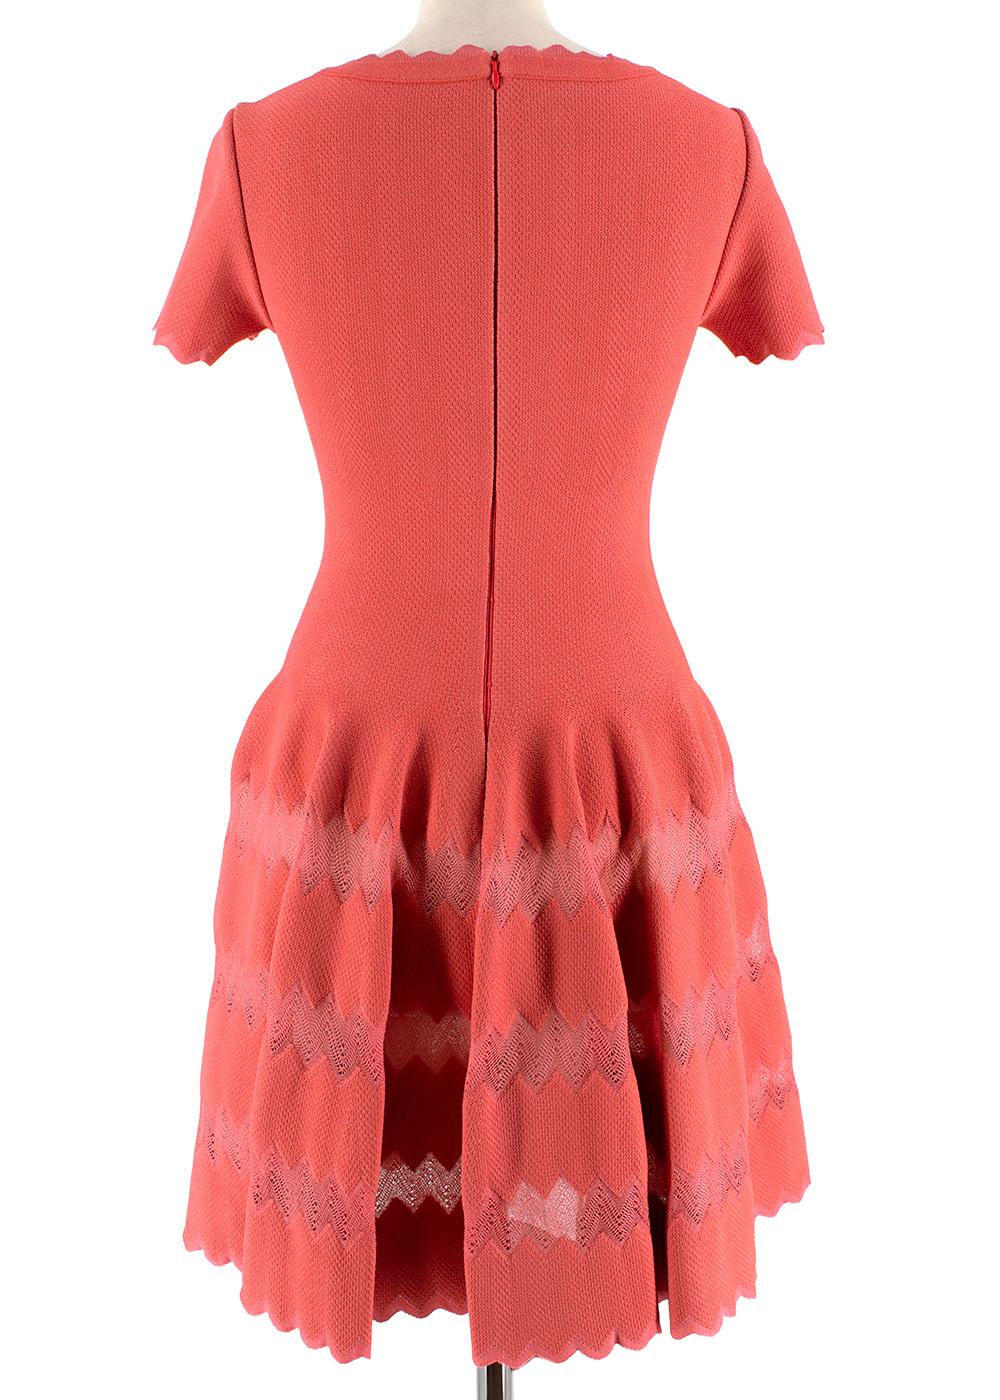 Red Alaia Coral Embroidered Knit Fit & Flare Mini Dress - Size US 6